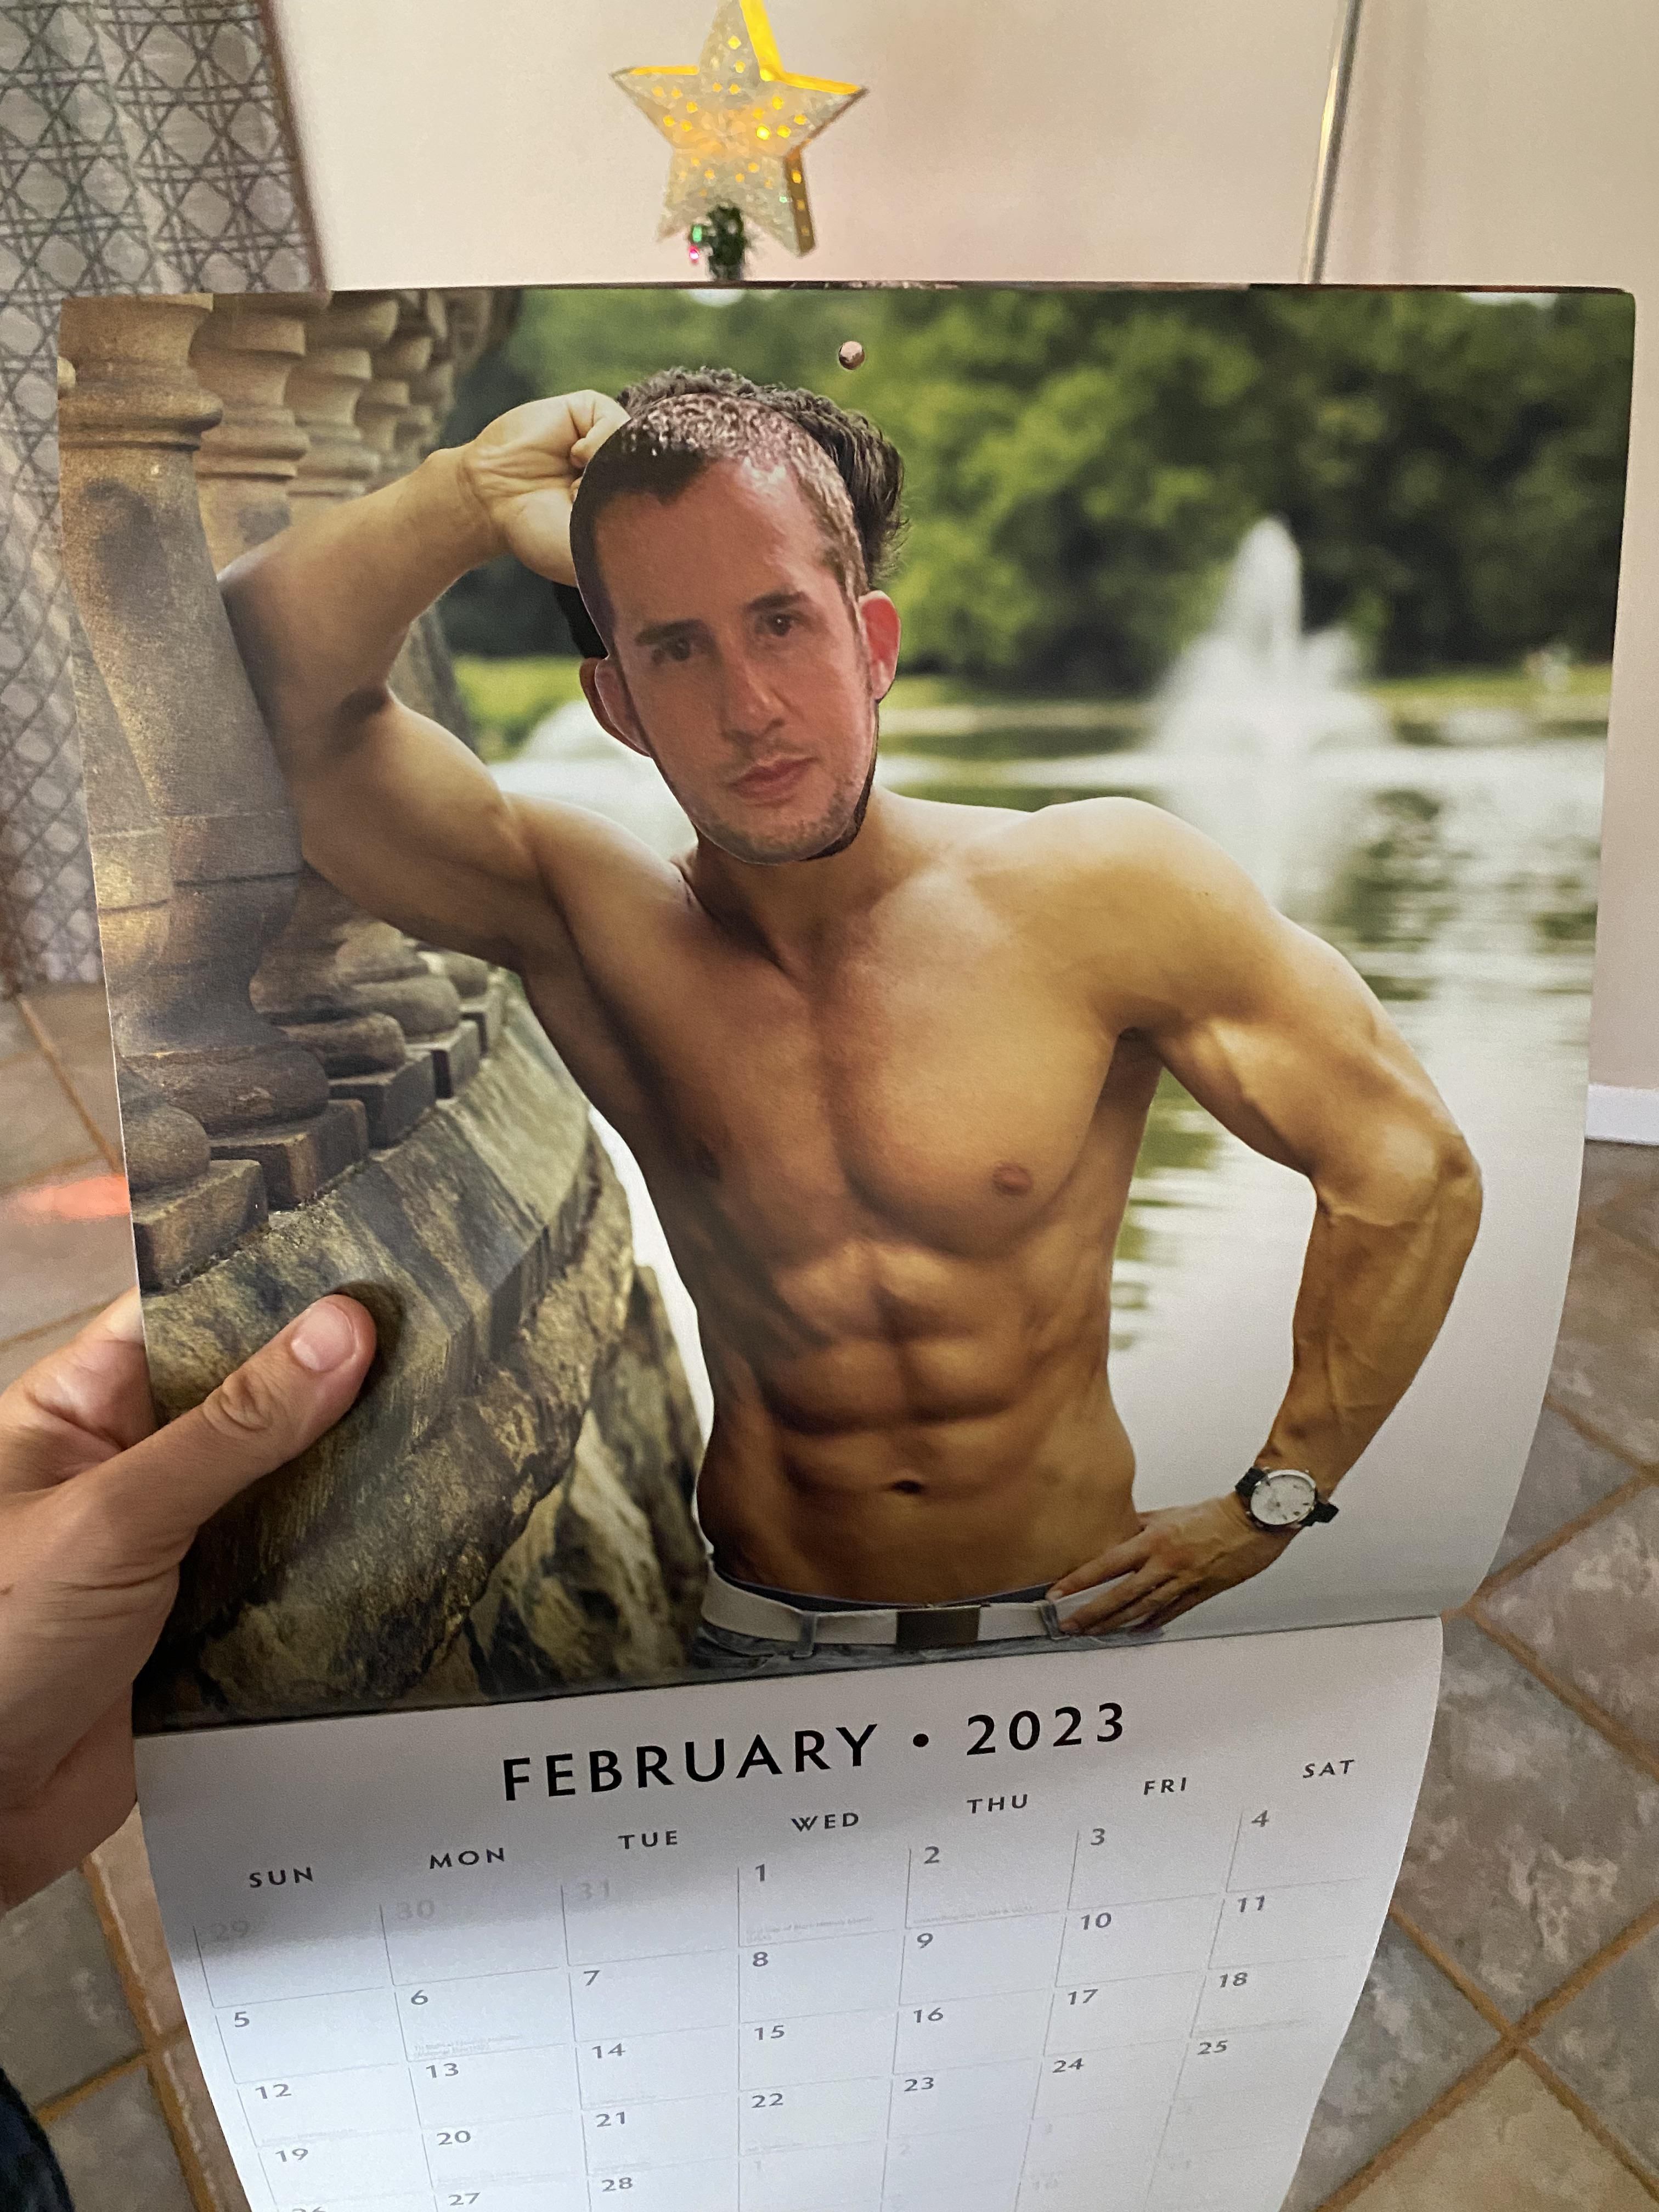 Every year I give my wife a hunky guy calendar with my face pasted on all the guys…